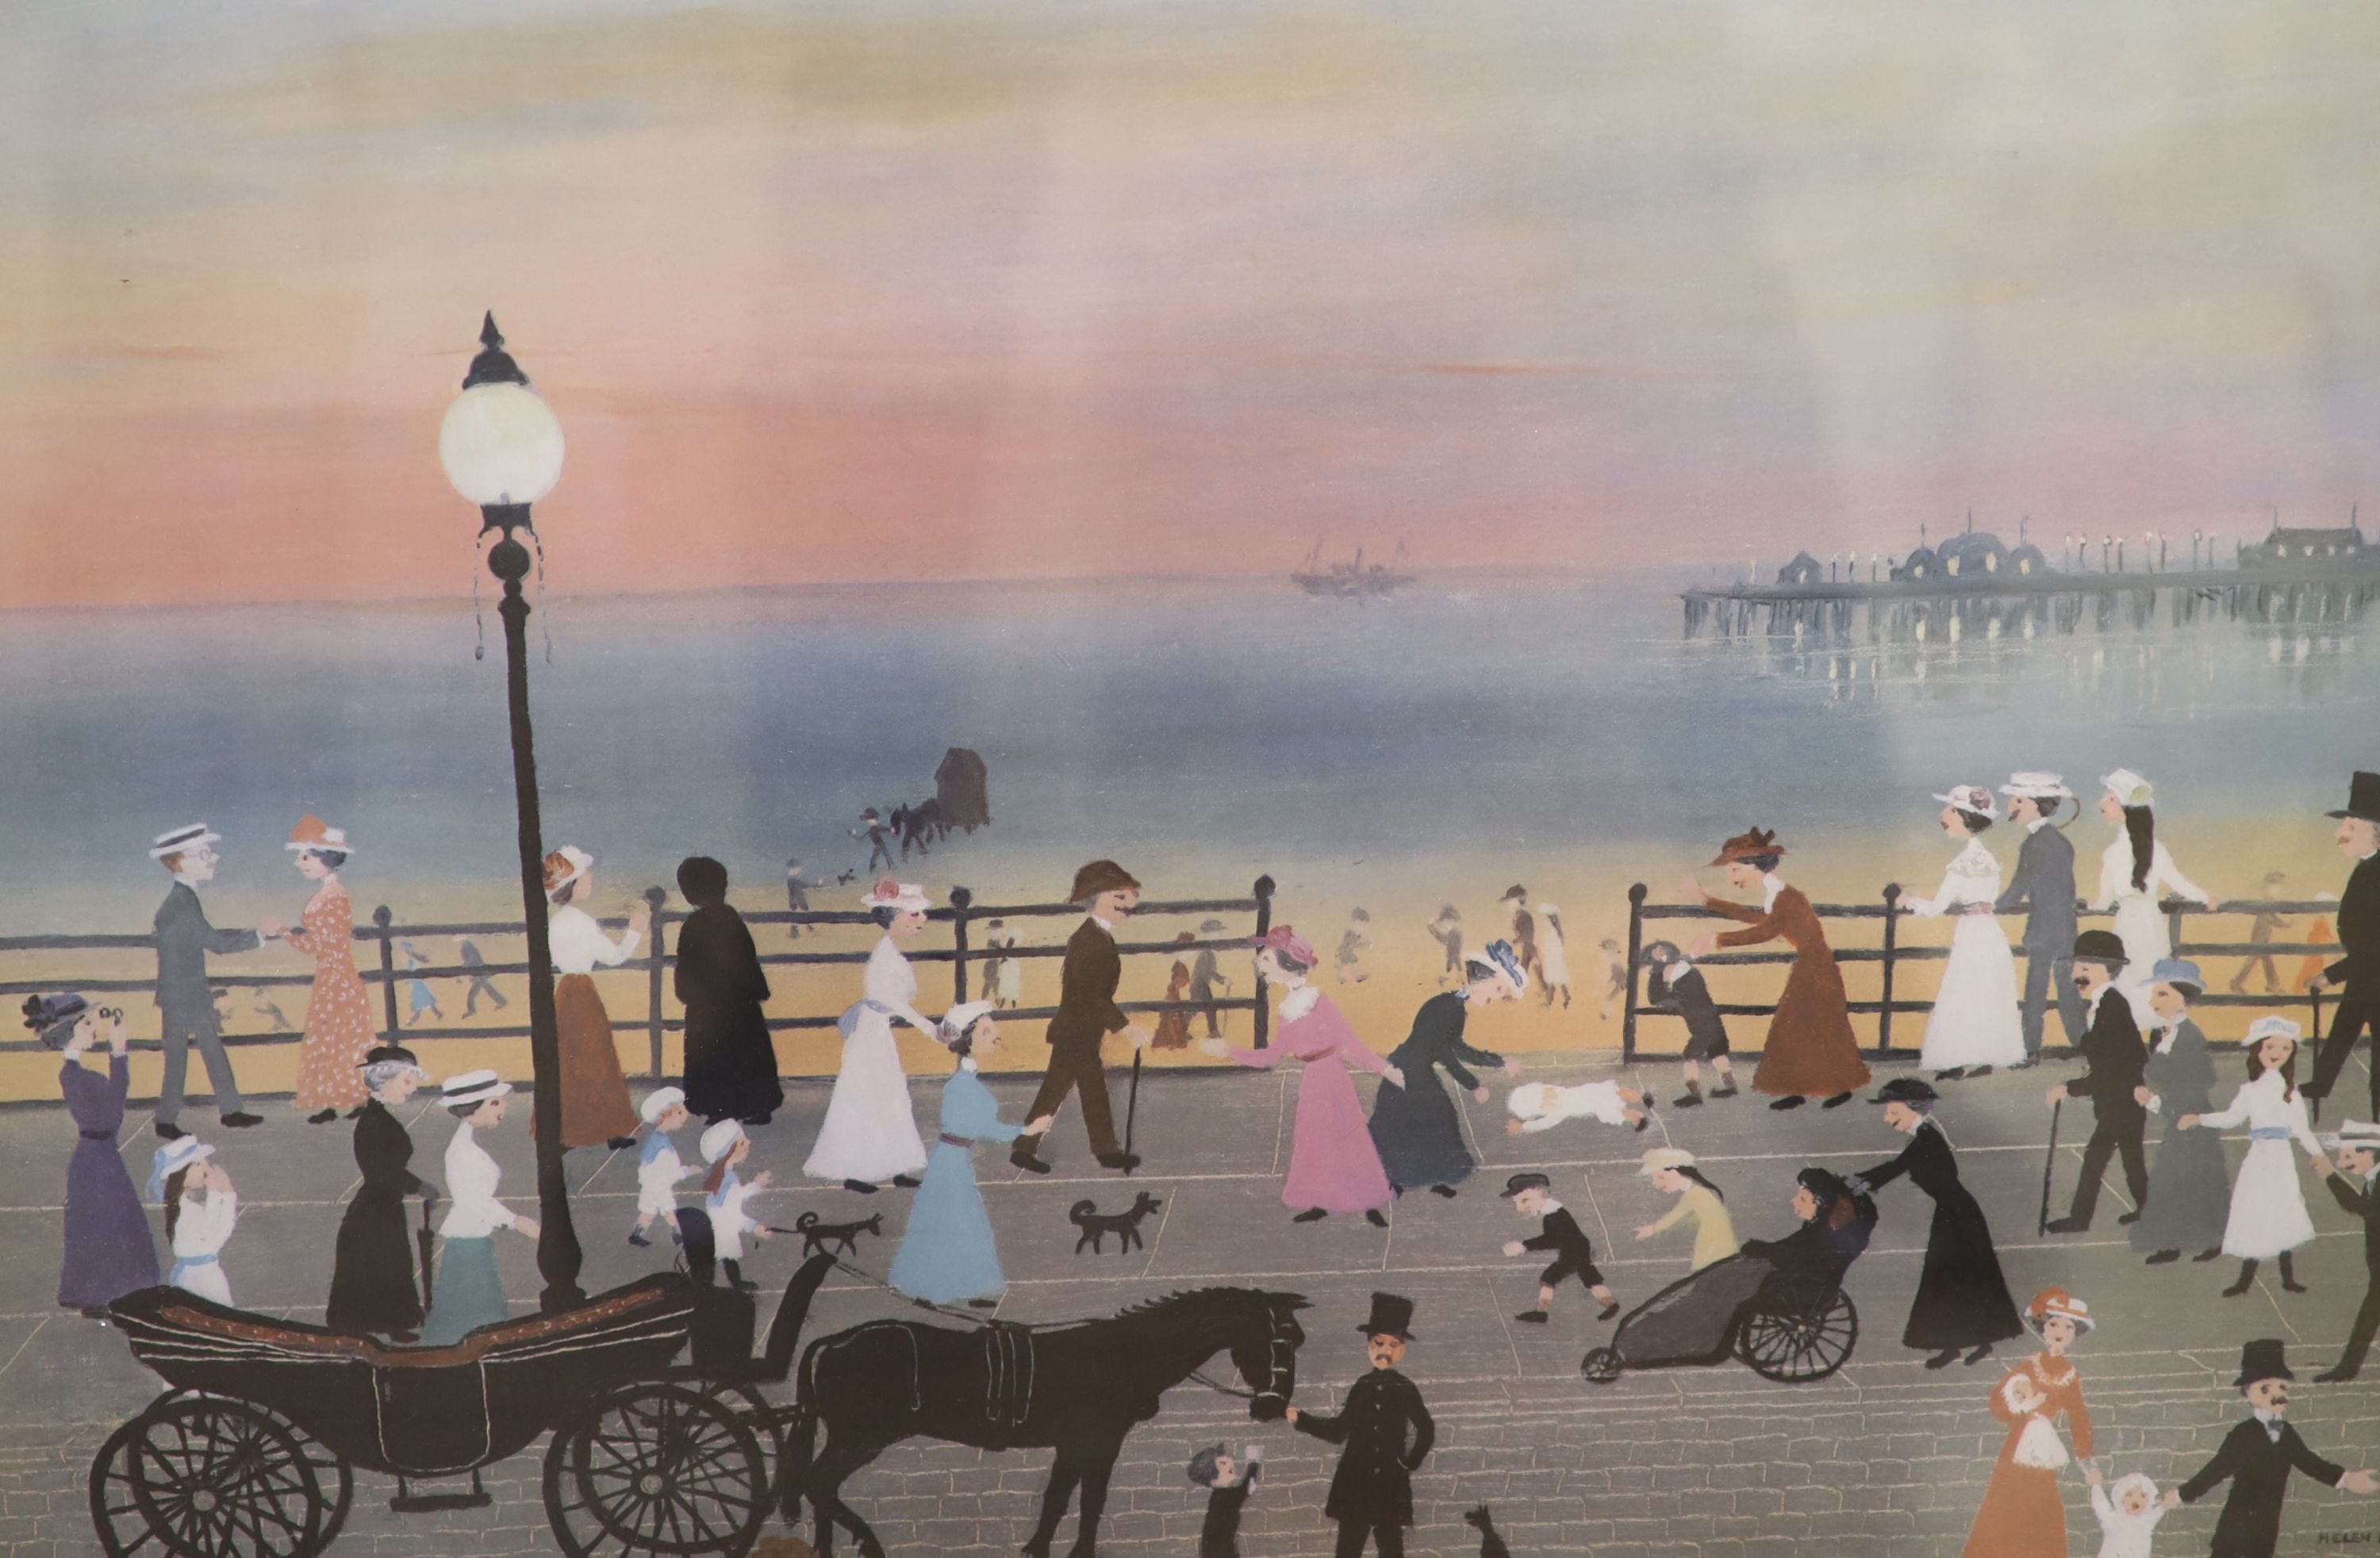 Helen Bradley, two signed prints, Blackpool Station and Blackpool Sands, both signed in pencil, overall 40 x 57cm and 48 x 62cm